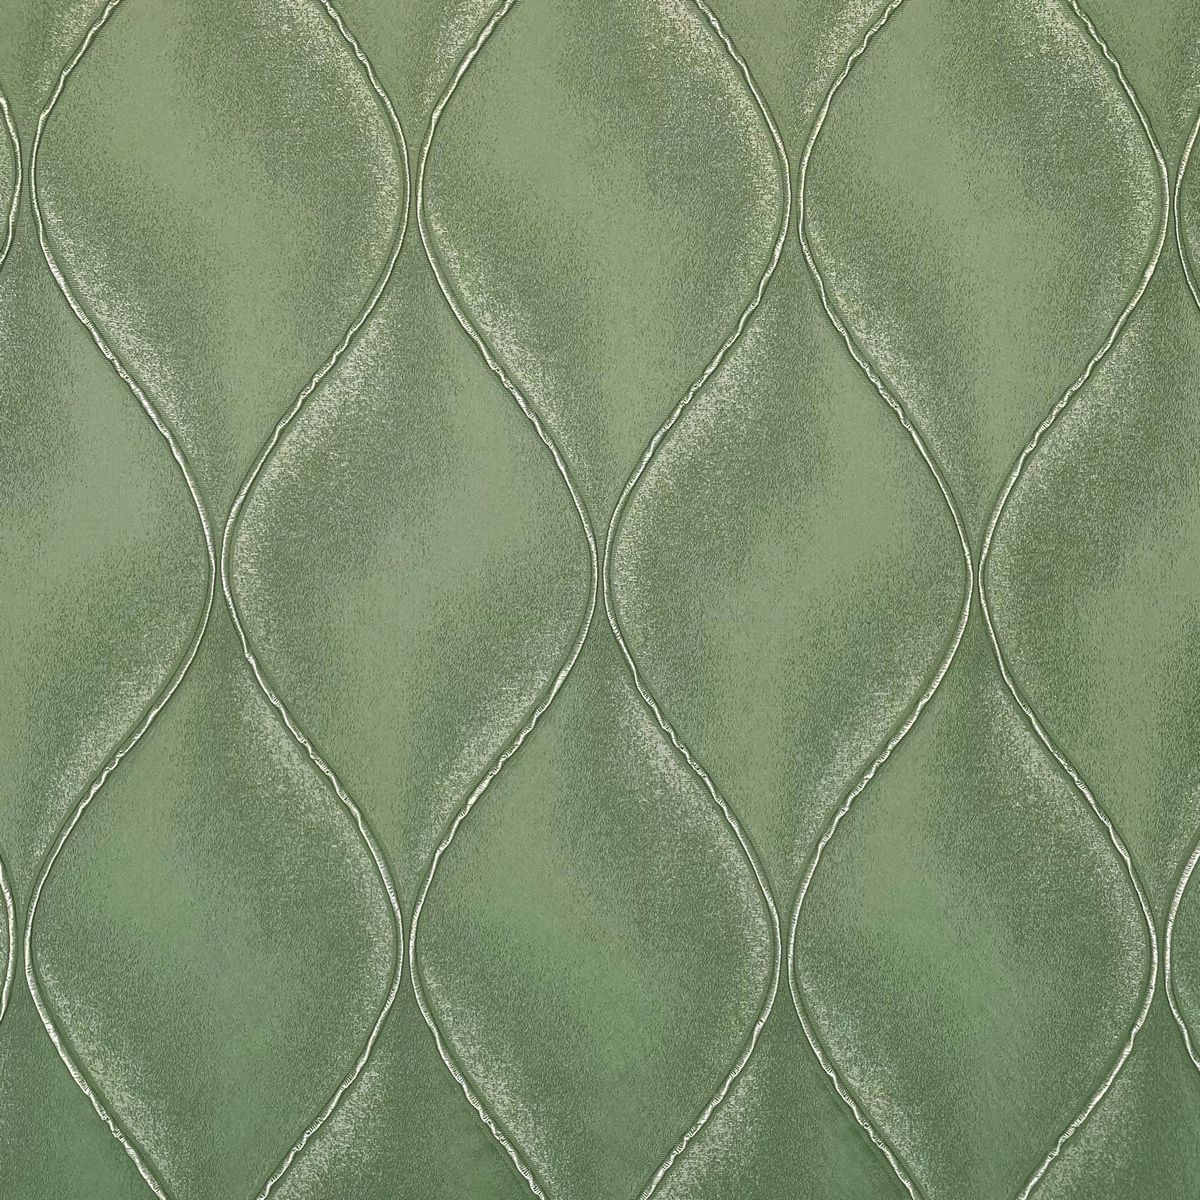 Charmed Pine Fabric by Chatham Glyn